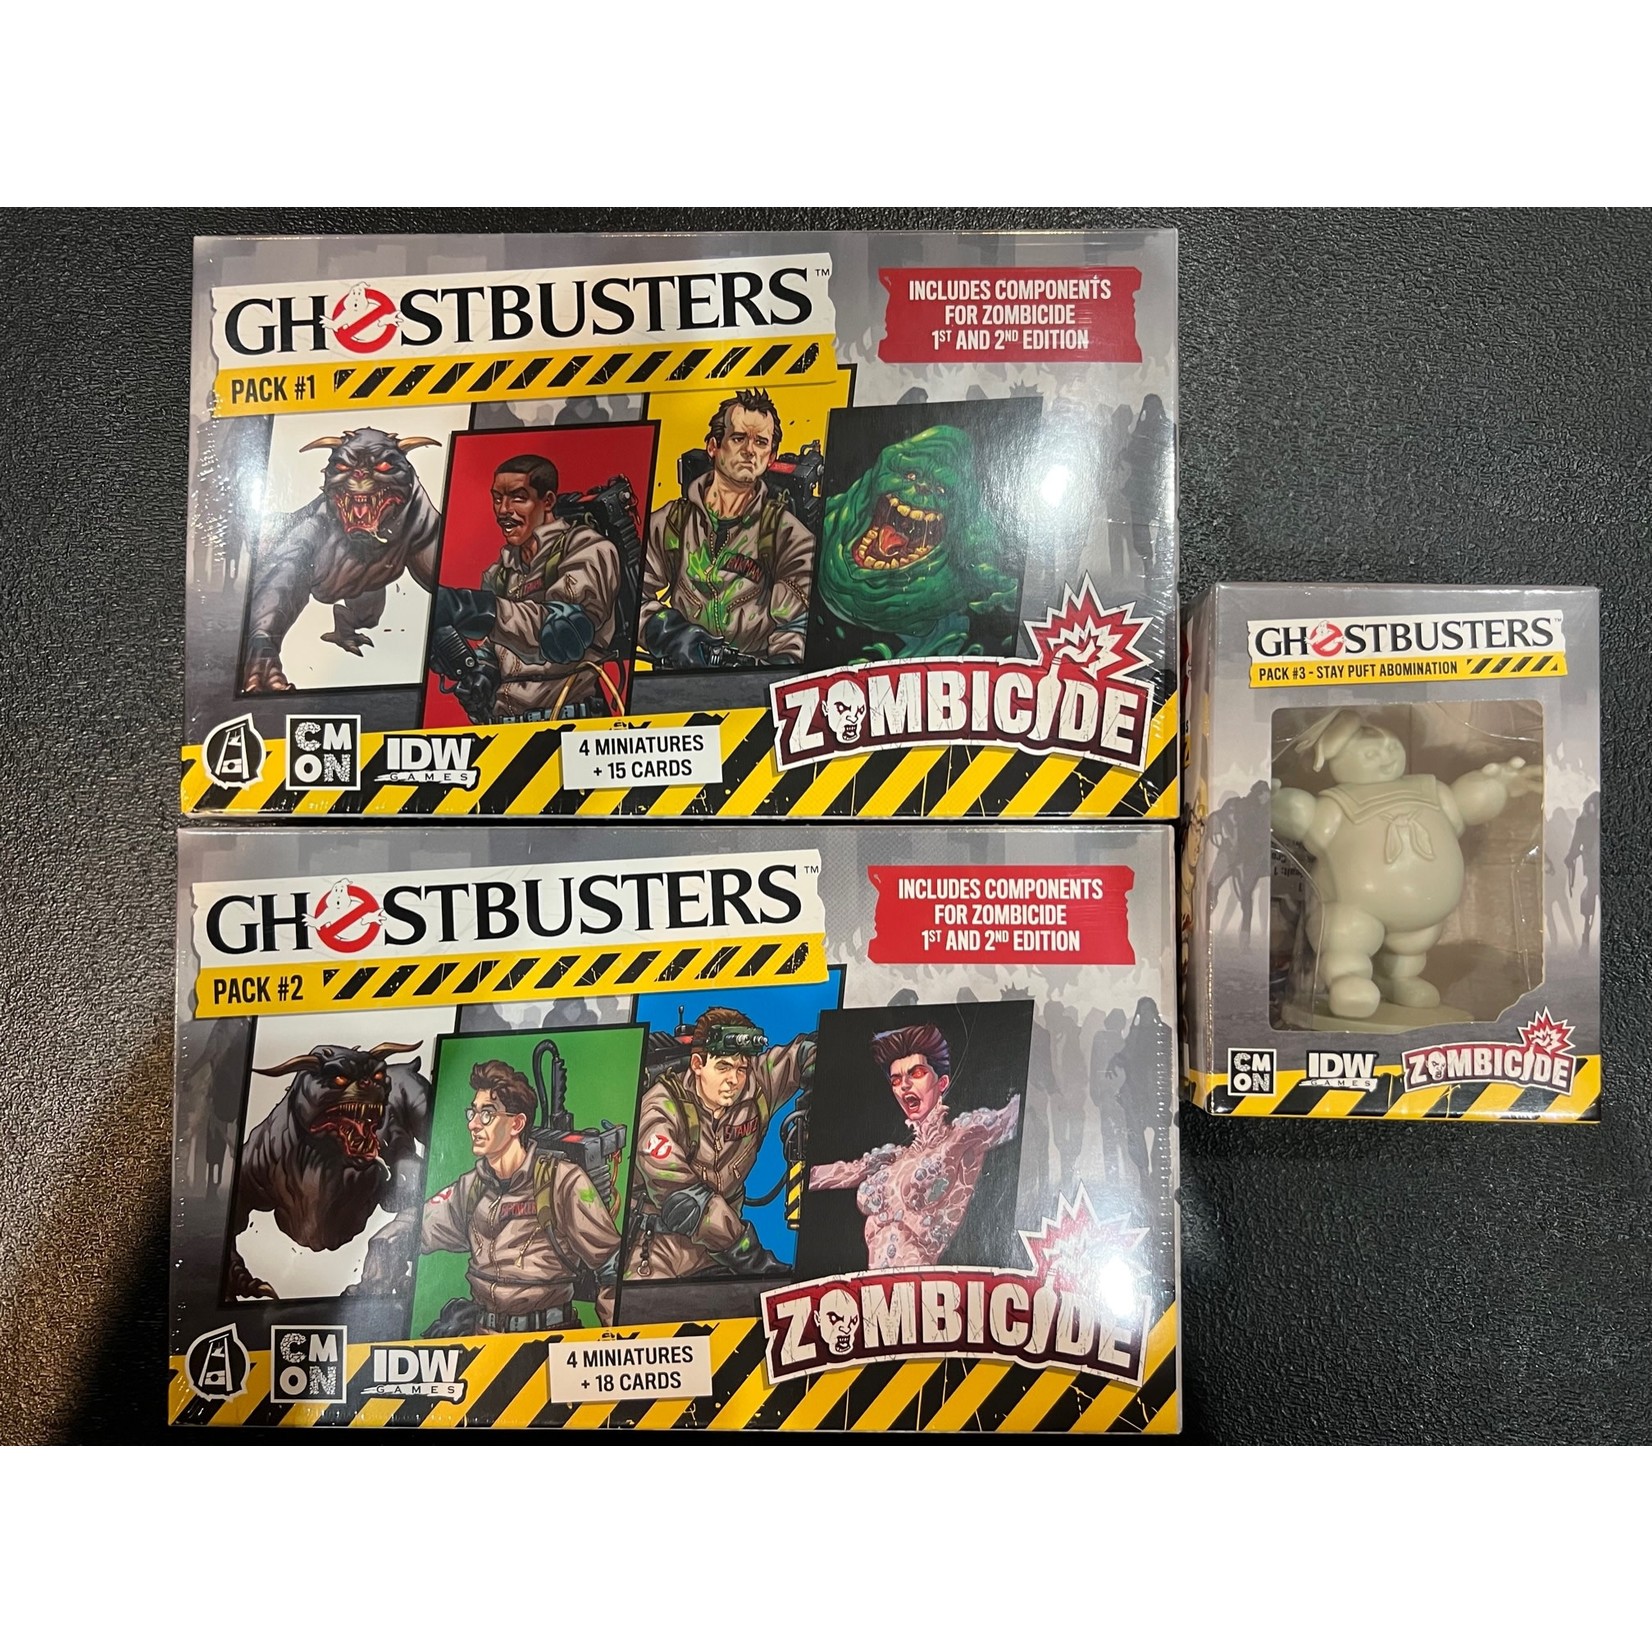 CMON: Cool Mini or Not CMON LE Zombicide Ghostbusters Character Packs 1 & 2 + Stay Puft Marshmallow Man Bundle